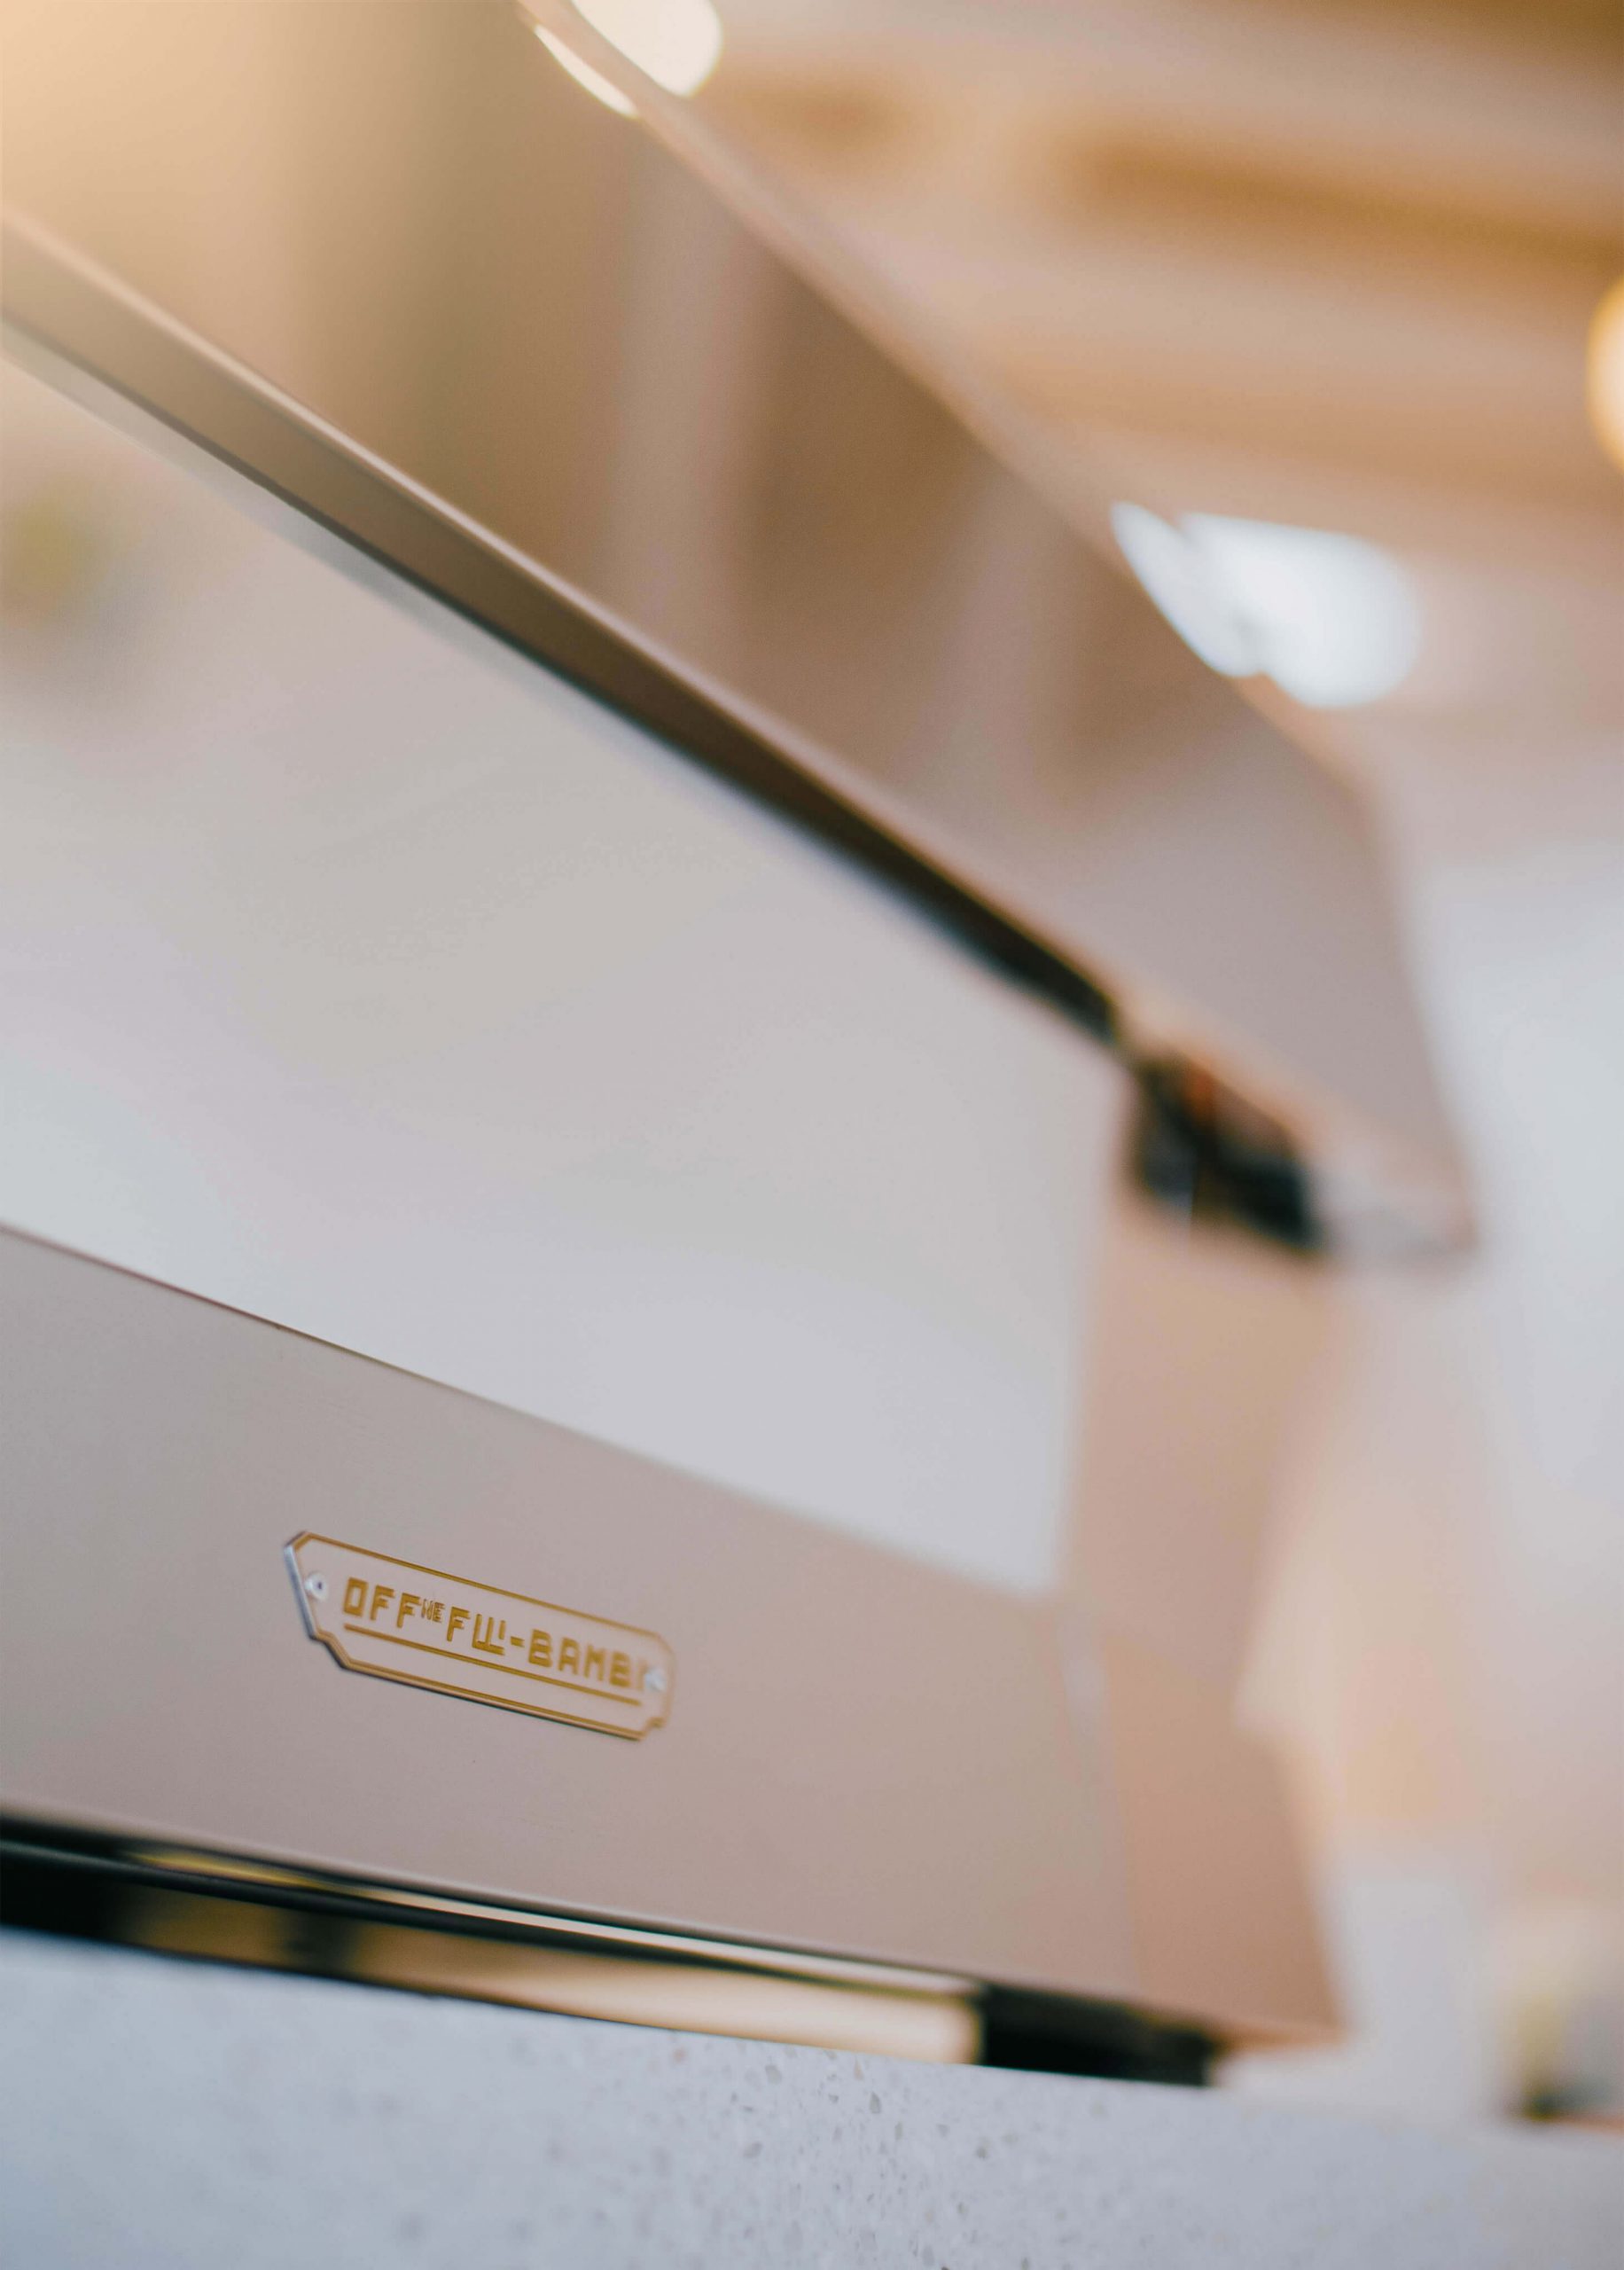 Portrait image of the backside of an Officine Fratelli Bambi espresso machine